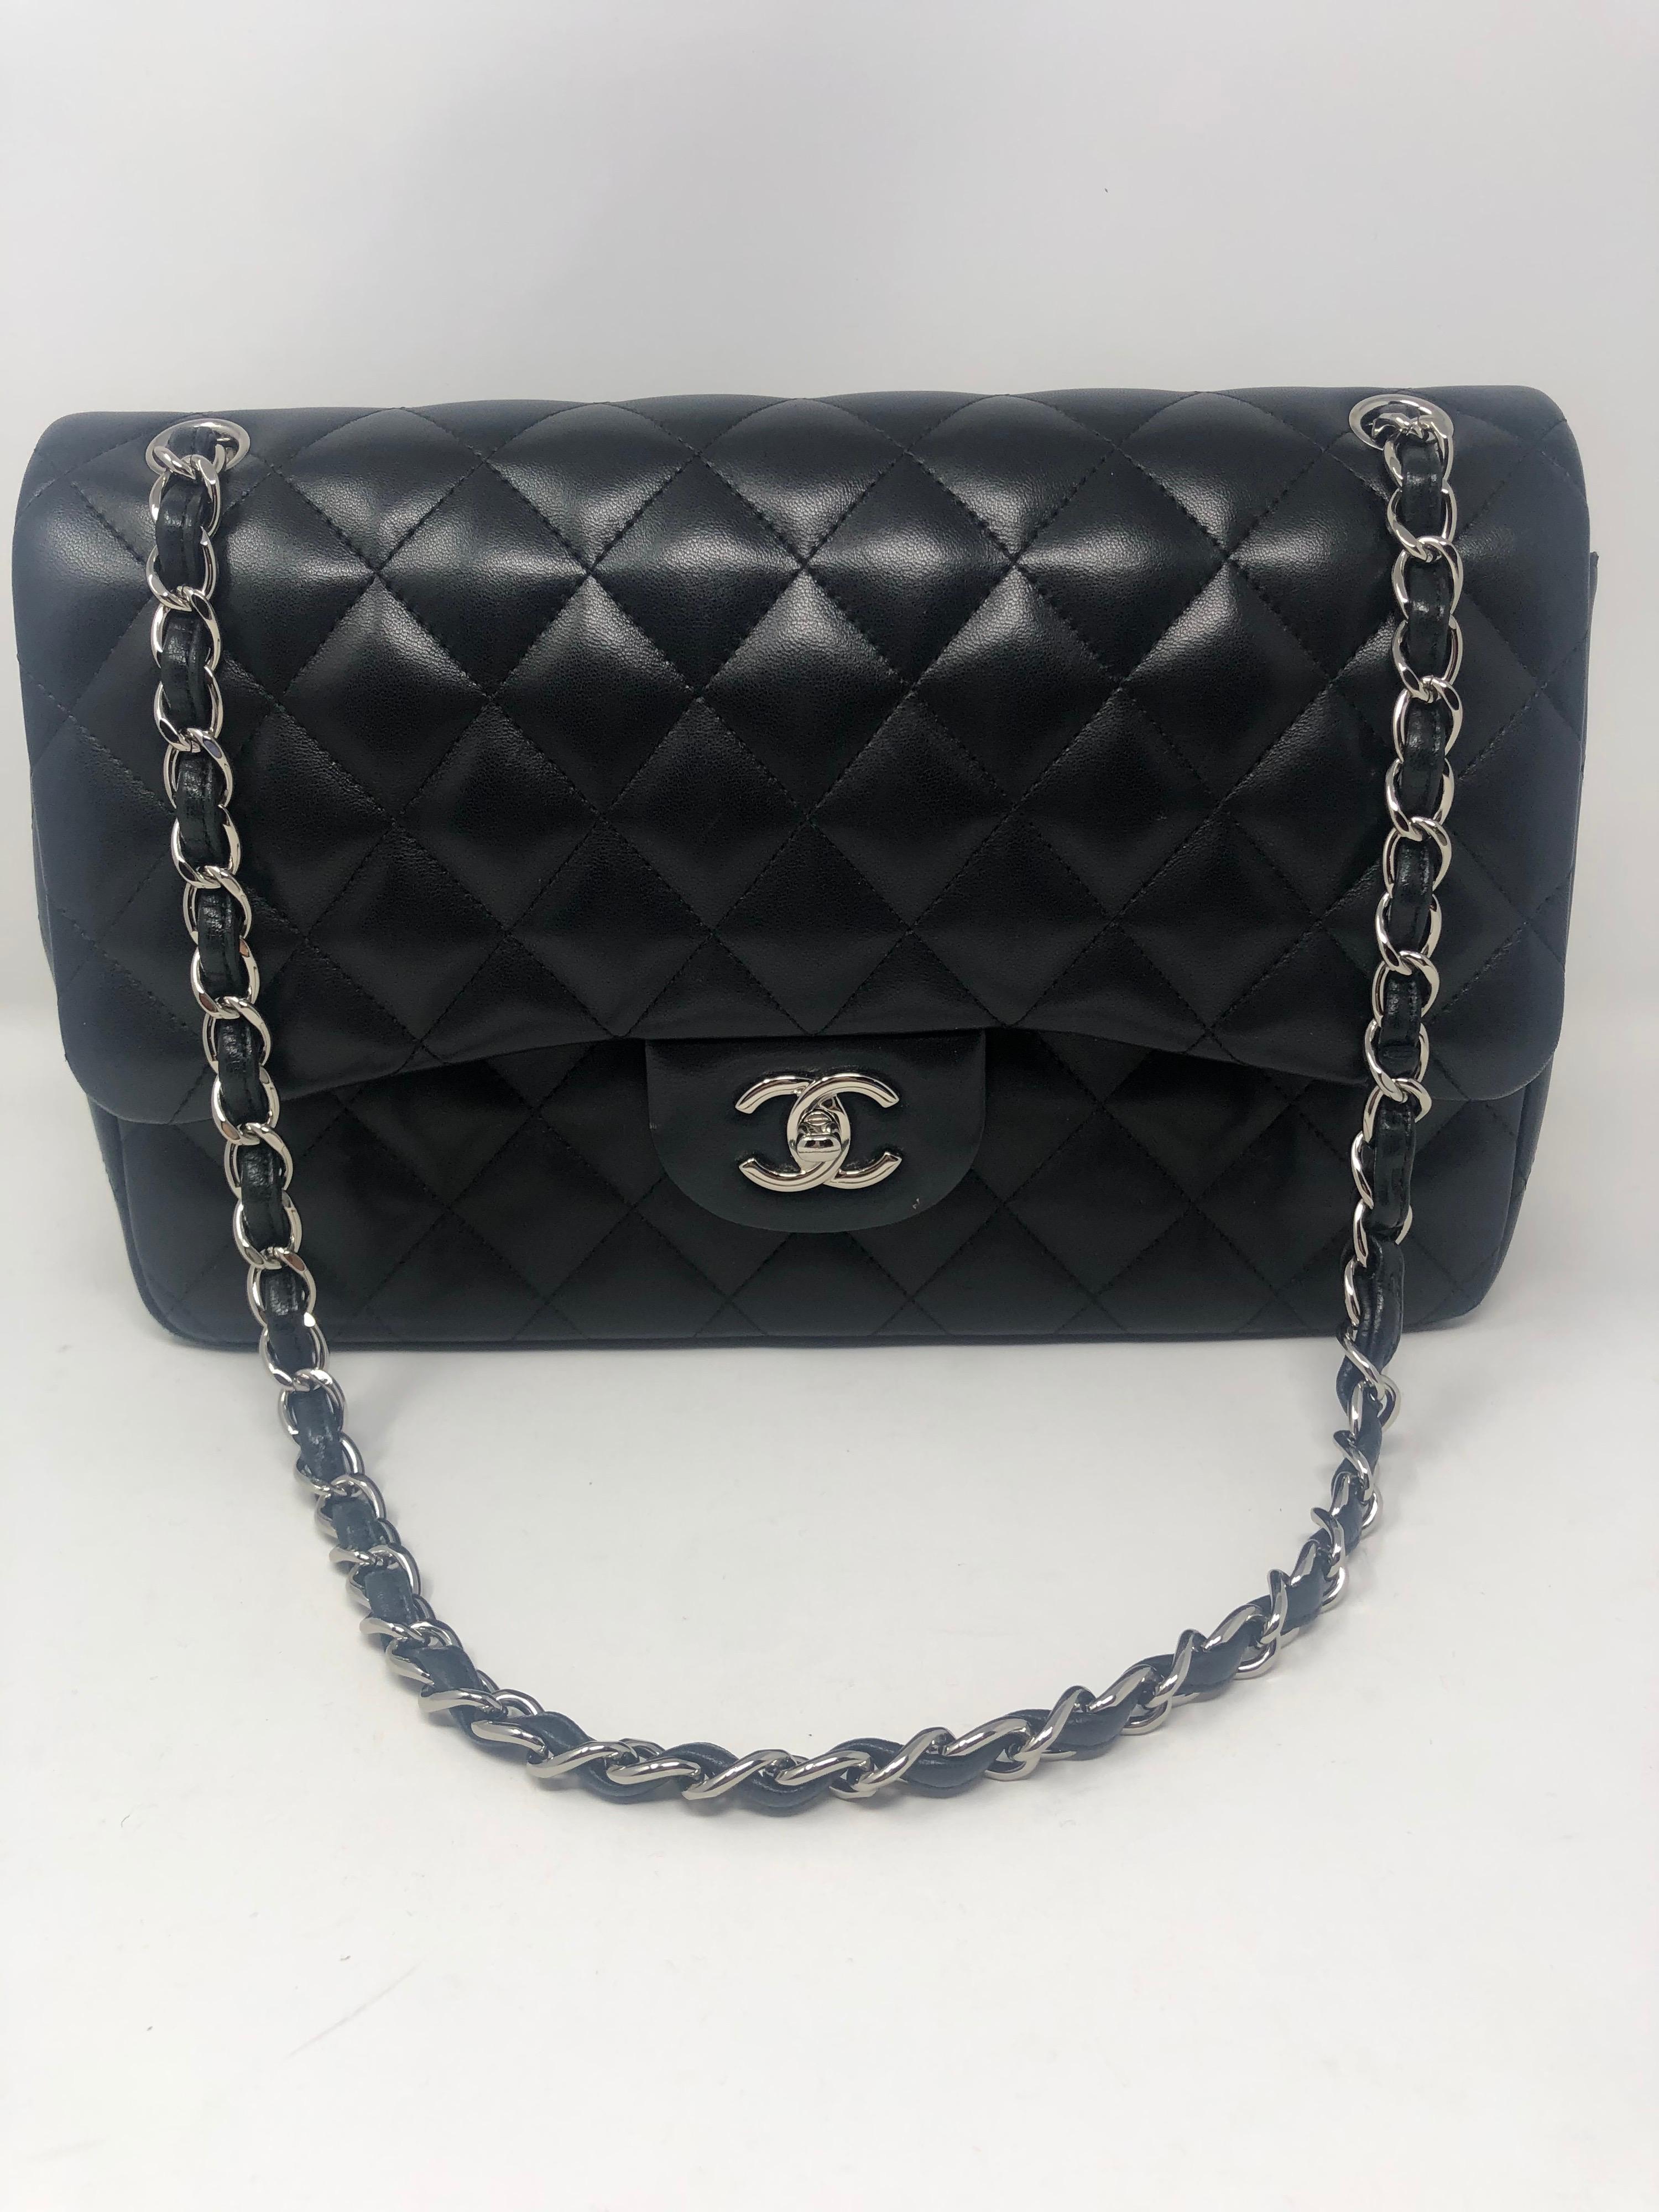 Chanel Jumbo Black Lambskin Leather Double Flap Bag. Silver hardware. Good condition. Chanel keeps going up. Great to invest in the classics just as this. Most wanted jumbo (medium-large size). Hard to find silver hardware too. Don't miss out on